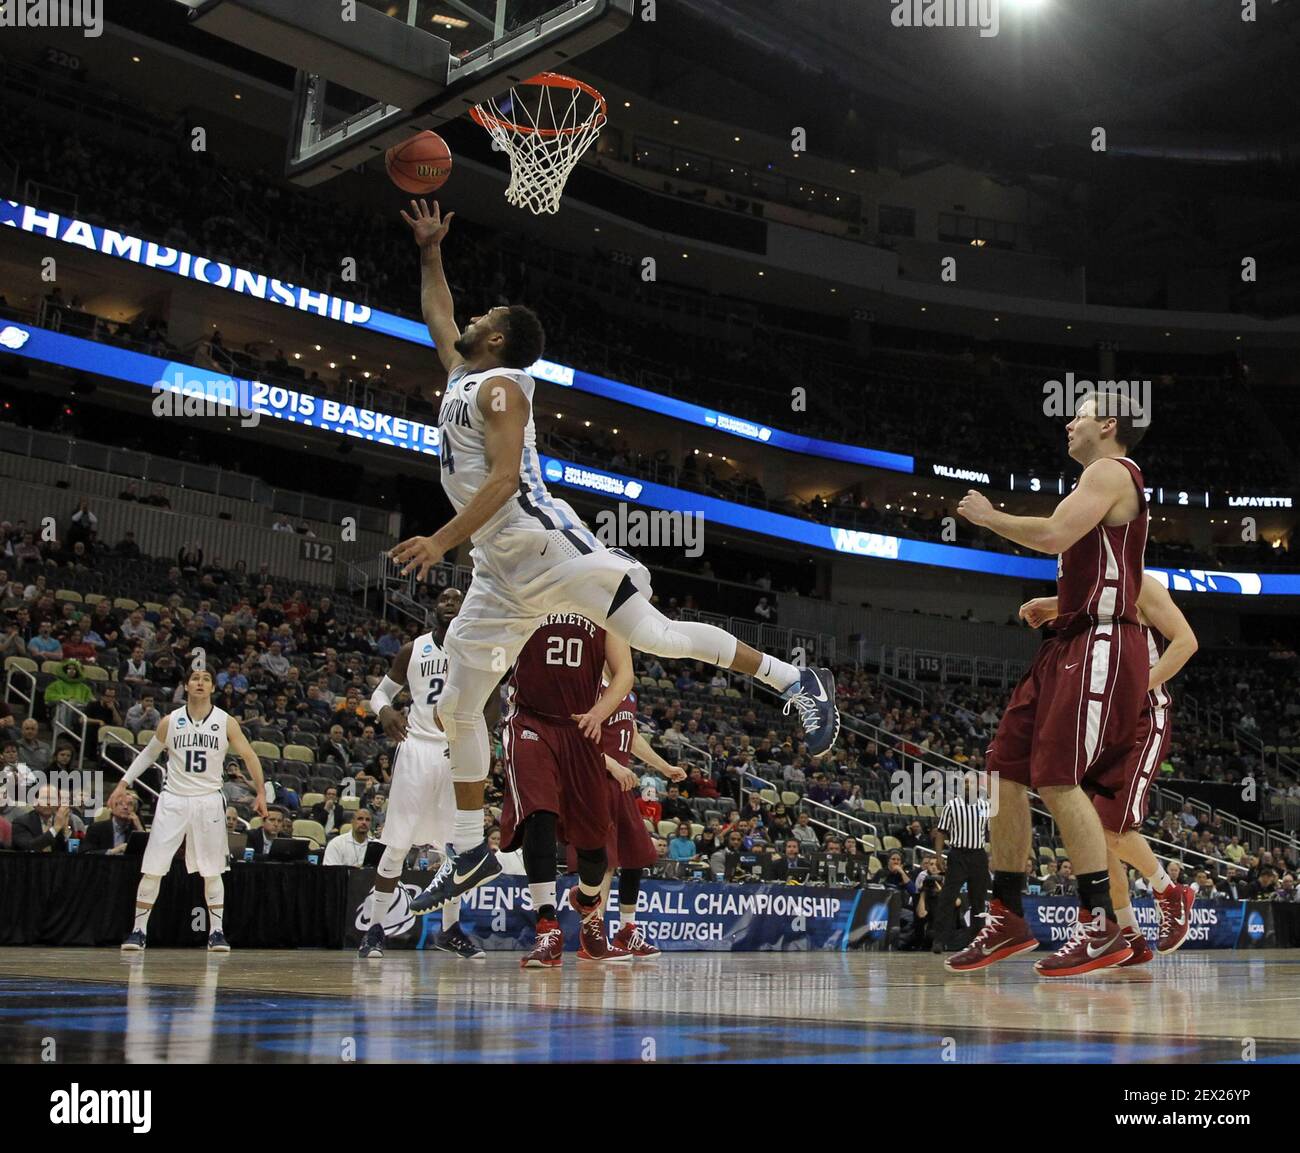 Villanova's Darrun Hillaird puts up a shot past Lafayette's Dan Trist (20) and Bryce Scott during the first half in the second round of the NCAA Tournament at the Consol Energy Center in Pittsburgh on Thursday, March 19, 2015. (Photo by Yong Kim/Philadelphia Daily News/TNS) *** Please Use Credit from Credit Field *** Stock Photo